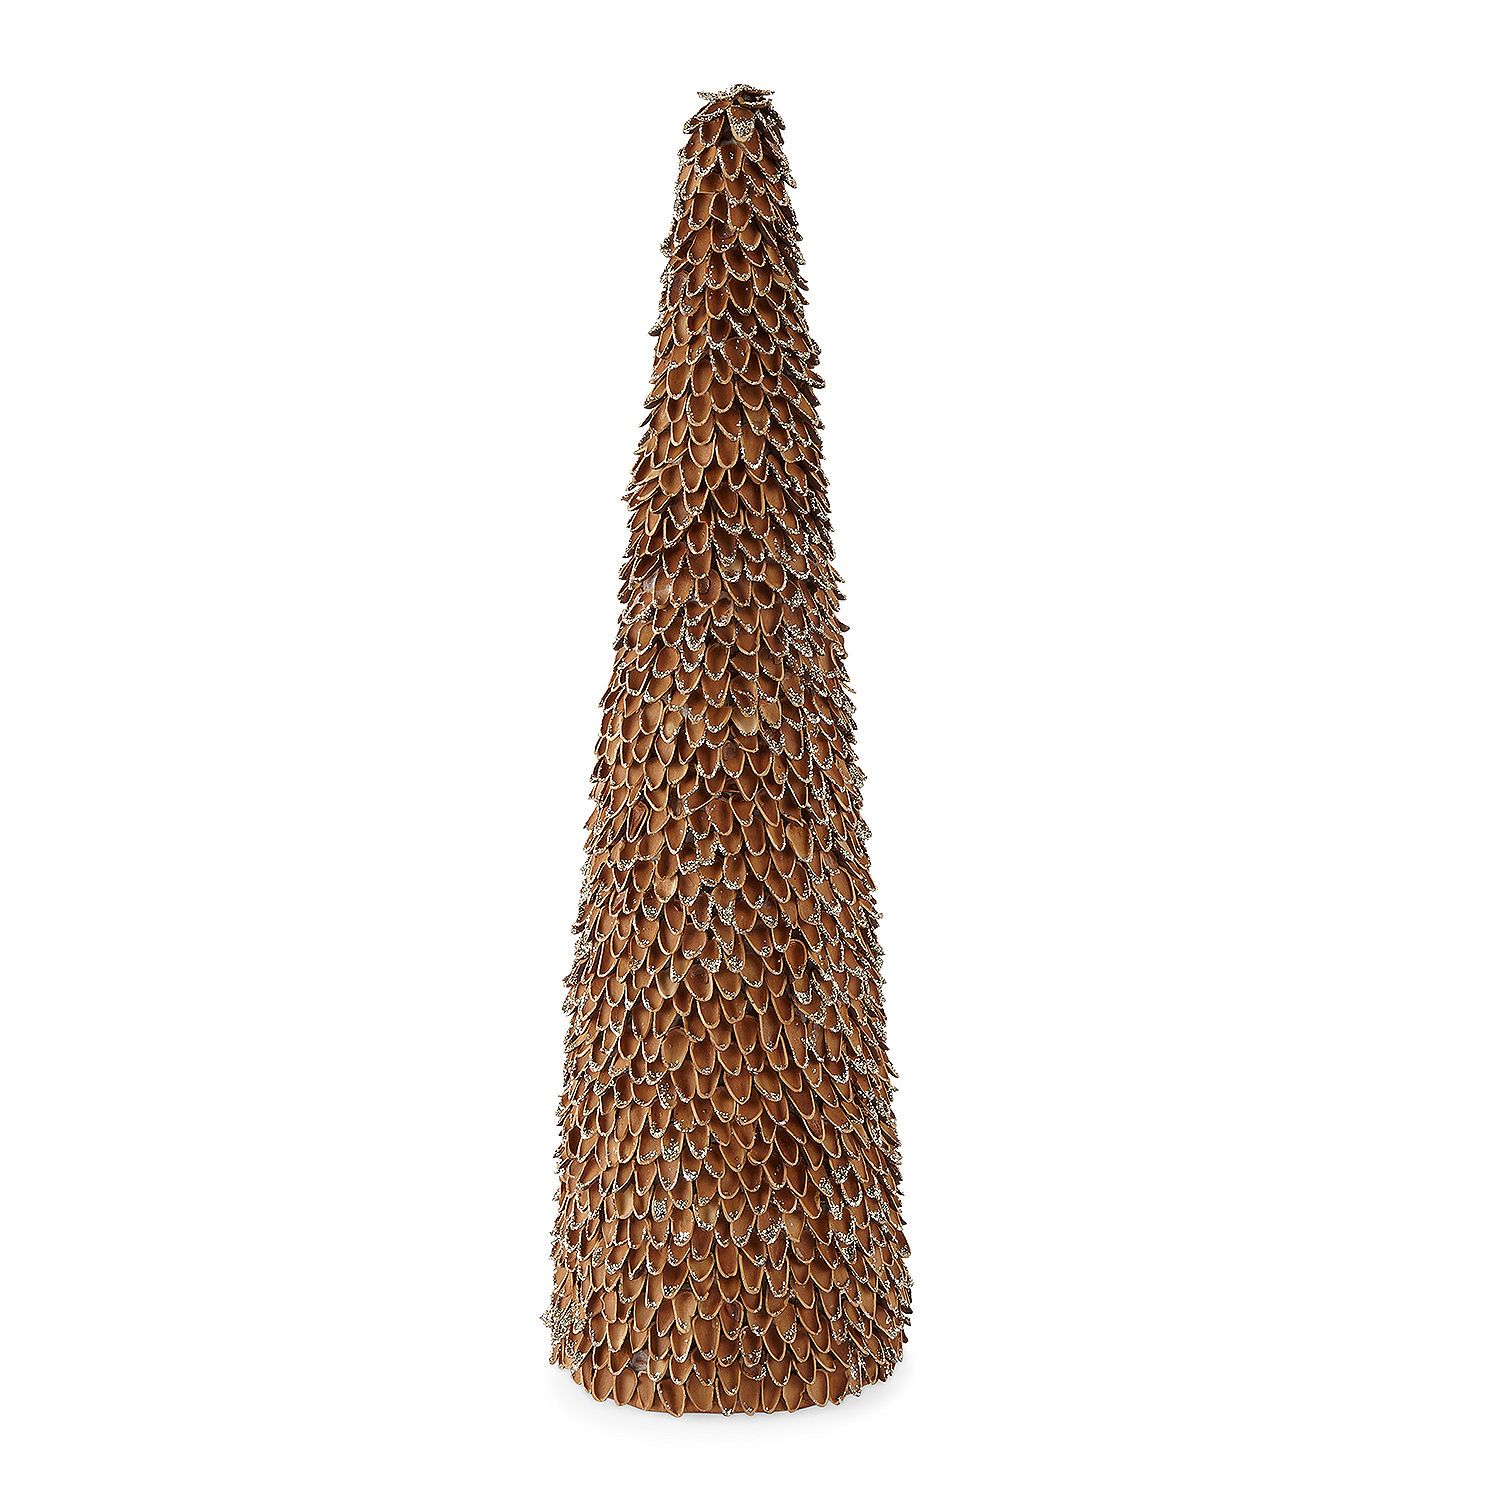 North Pole Trading Co. Pinecone Christmas Tabletop Tree | JCPenney